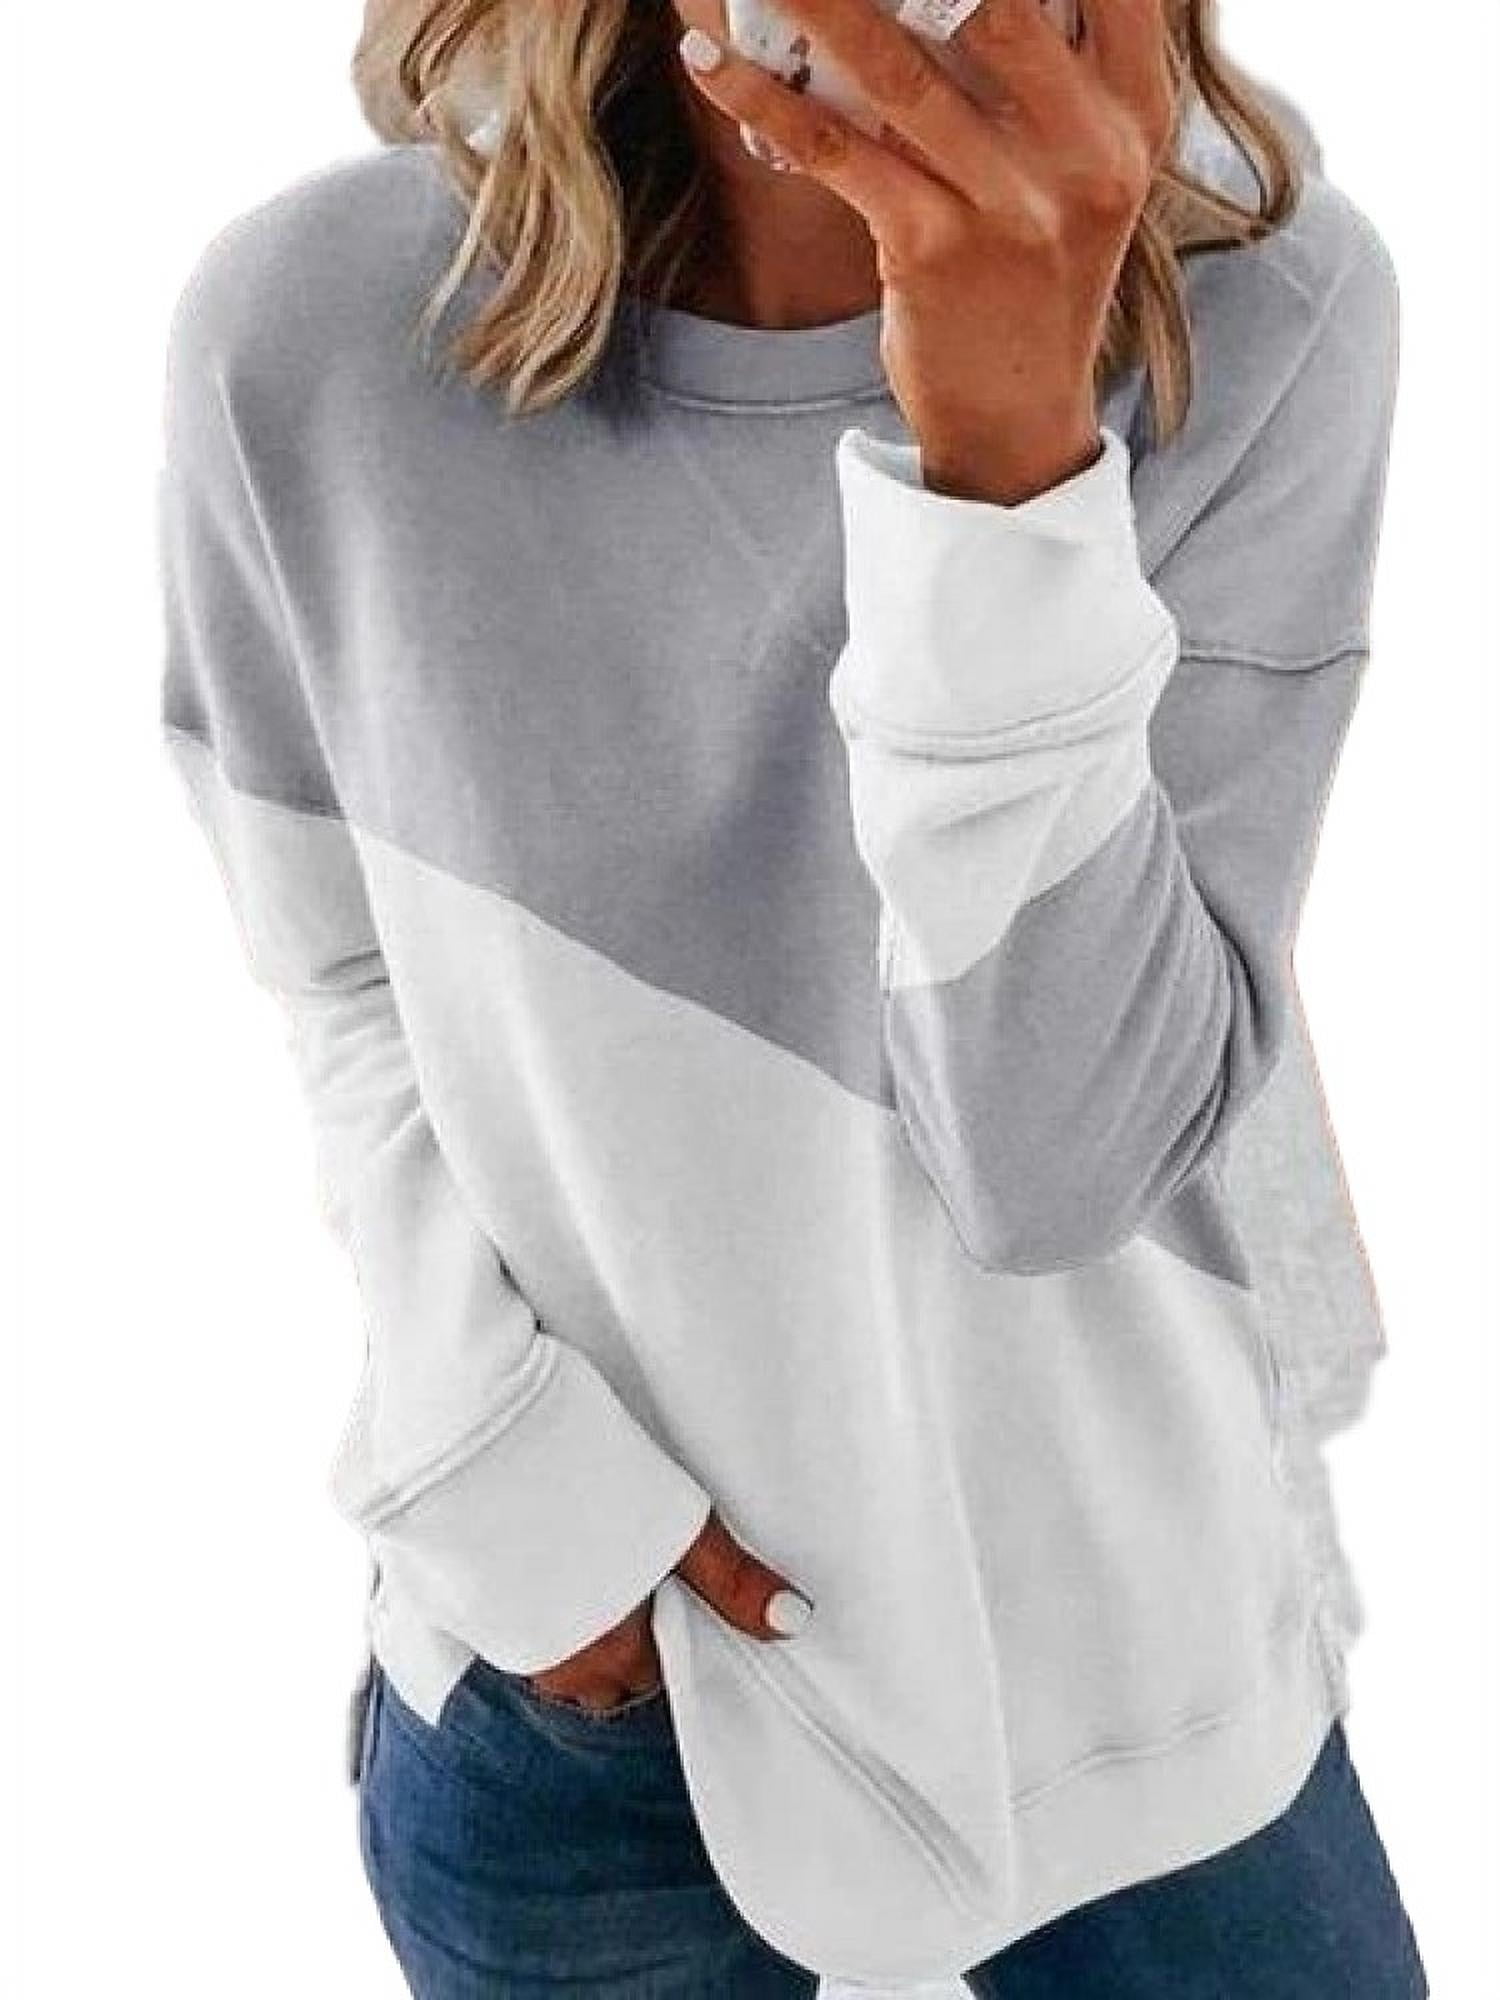 S-2XL Biucly Womens Casual Loose Color Block Long Sleeve Solid Crew Neck Soft Pullovers Blouses Sweatshirt Shirt Tops 